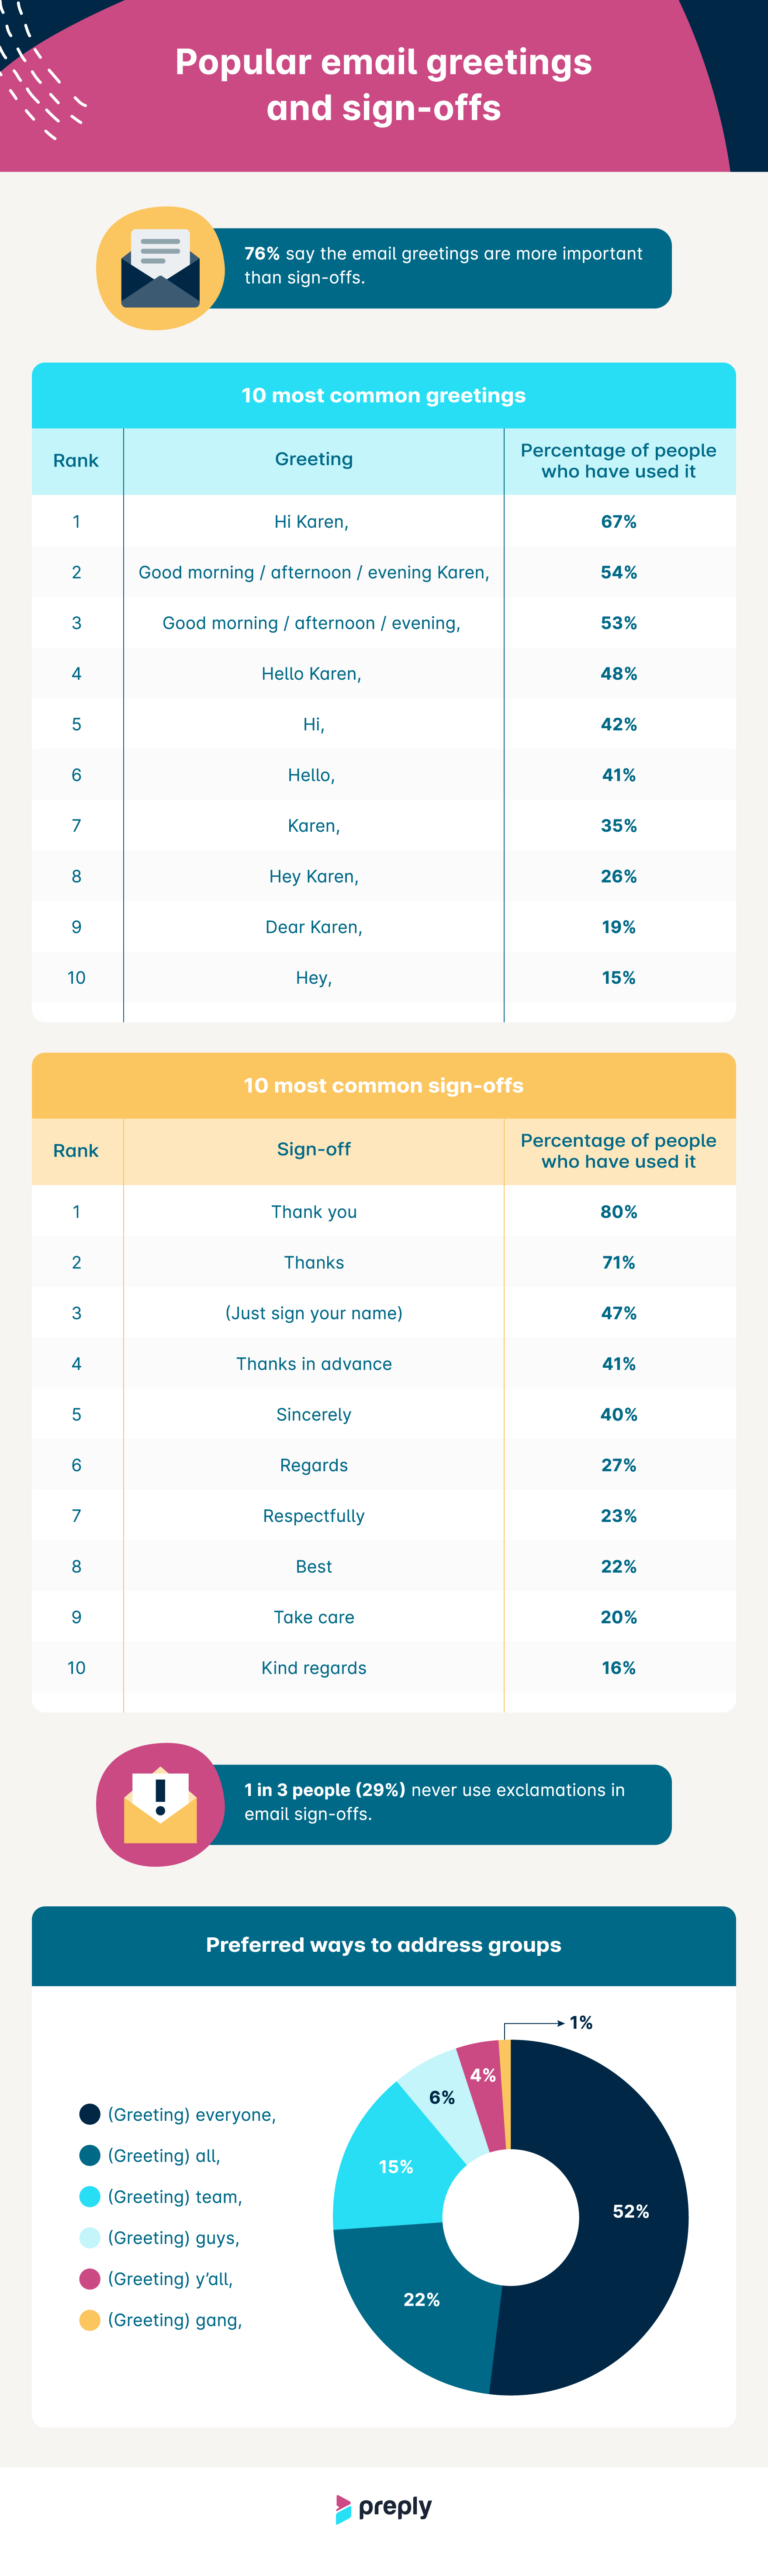 Popular email greetings and signoffs infographic